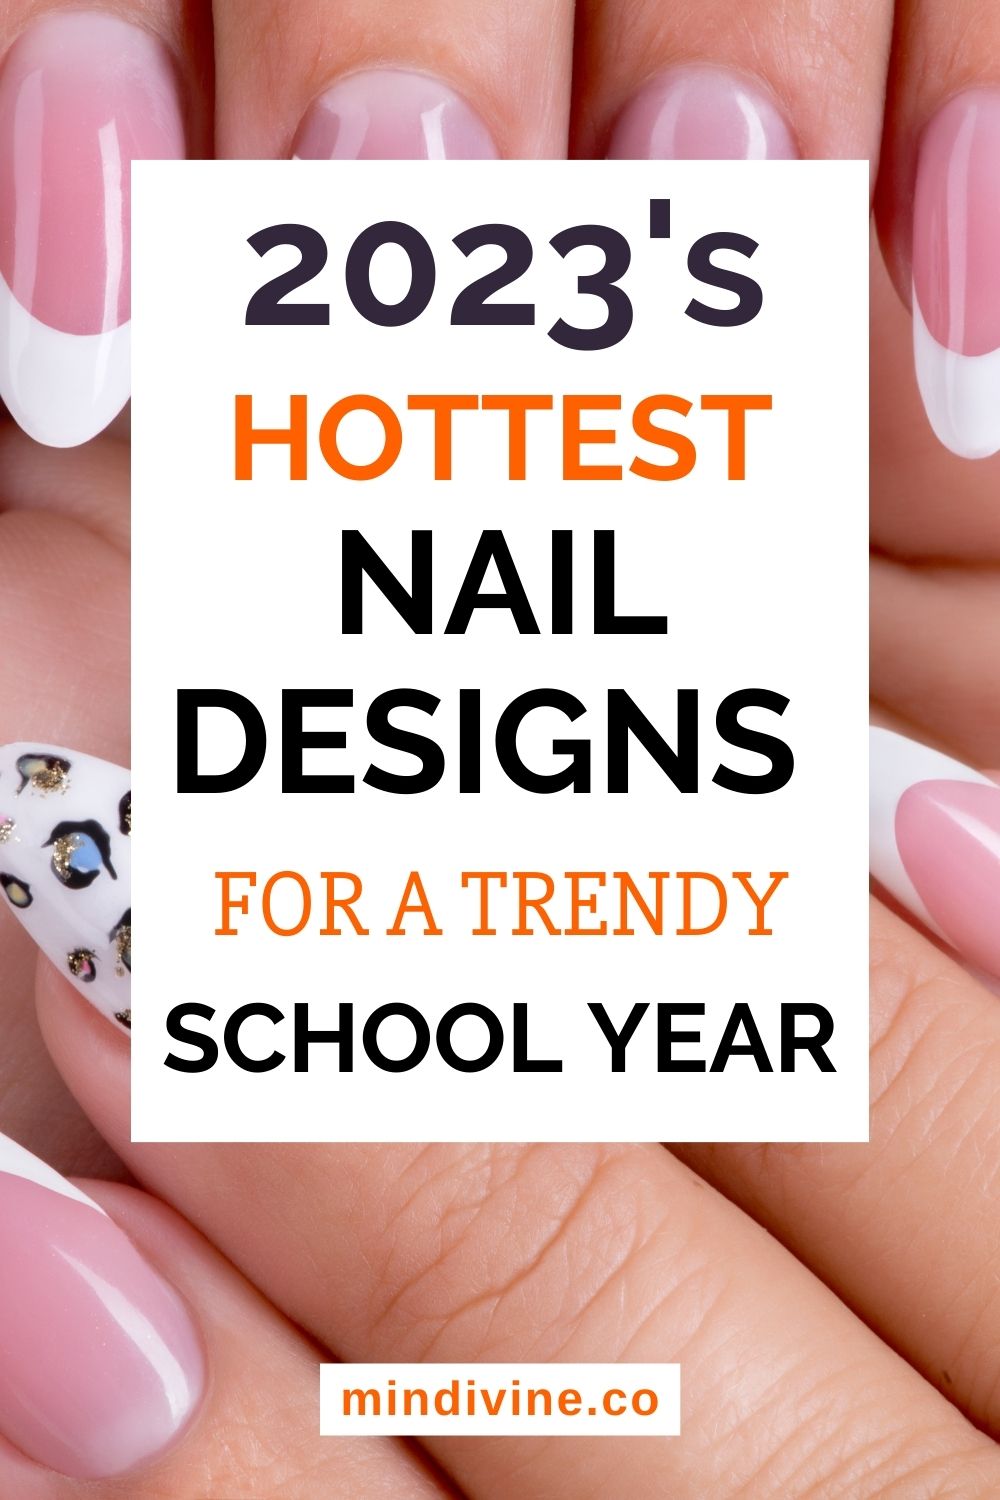 Women's nails with cool designs.